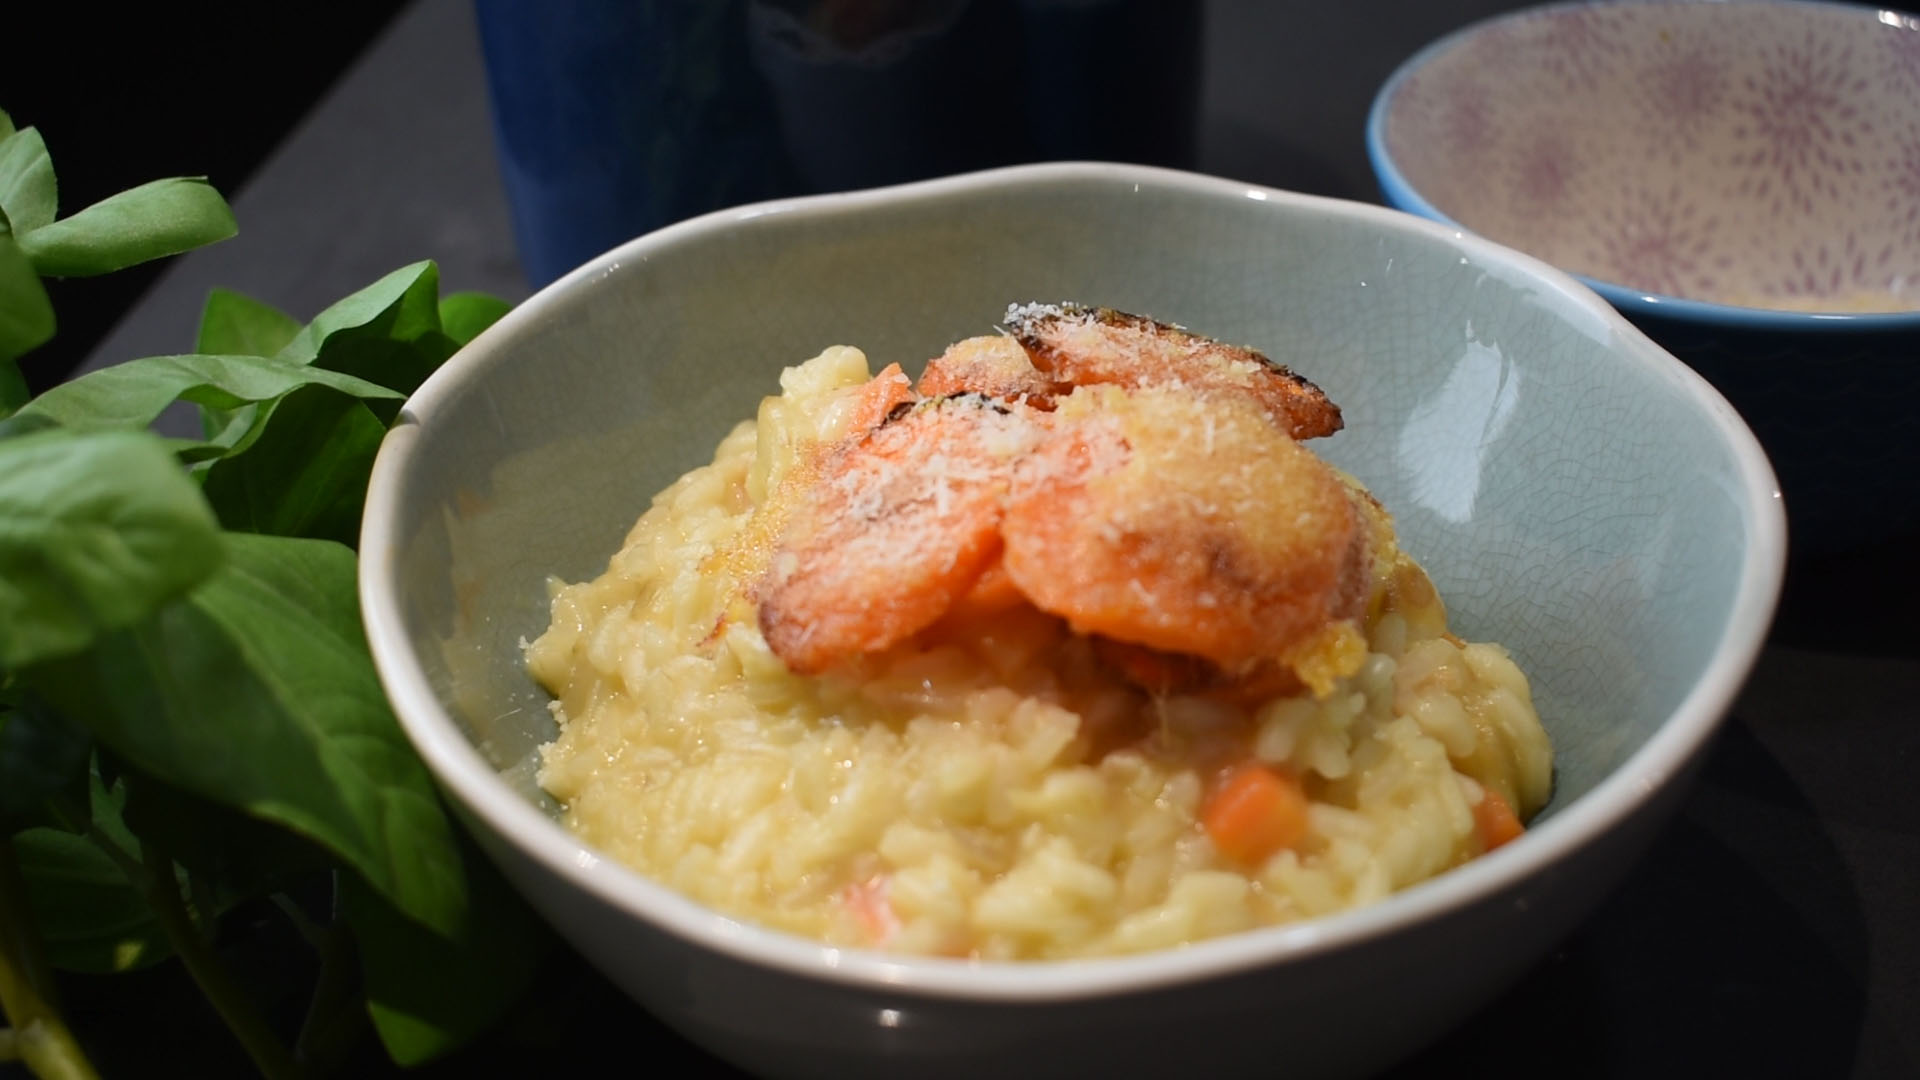 Carrot risotto with roasted parmesan carrots on top